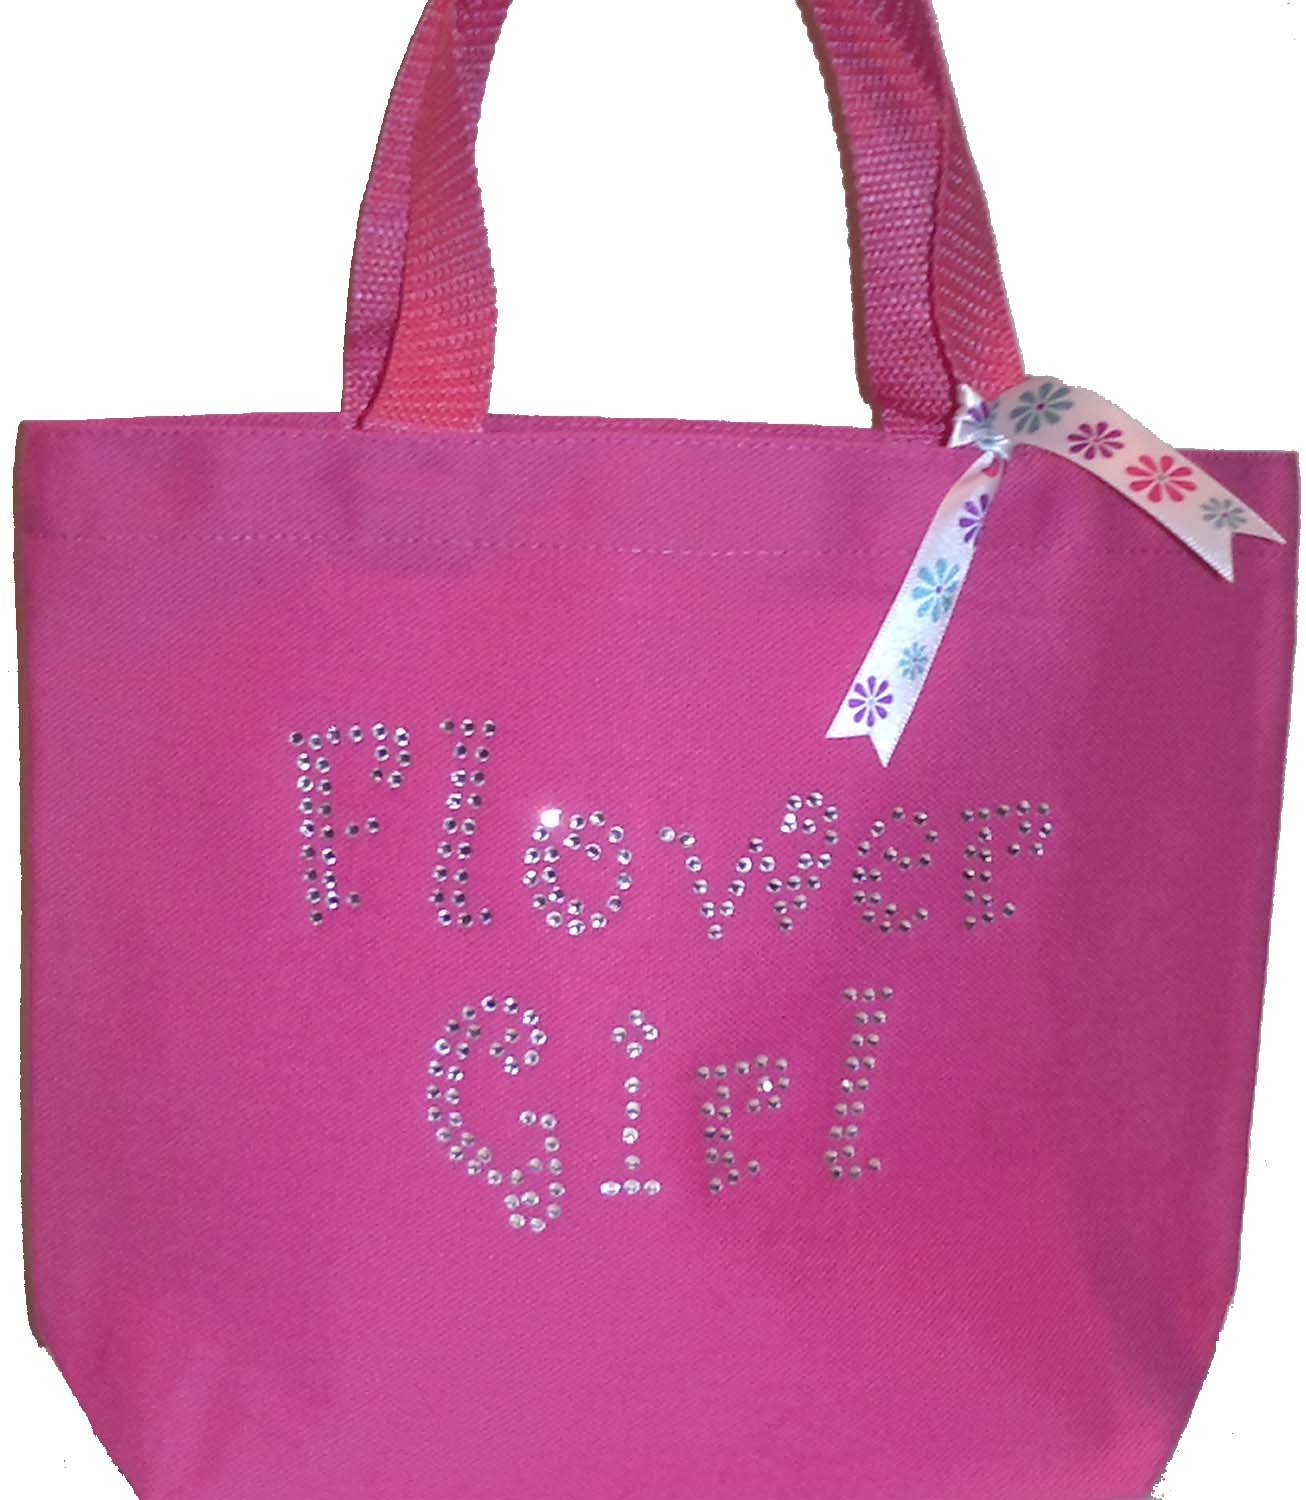 FLOWER GIRL personalized rhinestone pink tote gift by jackijoy11